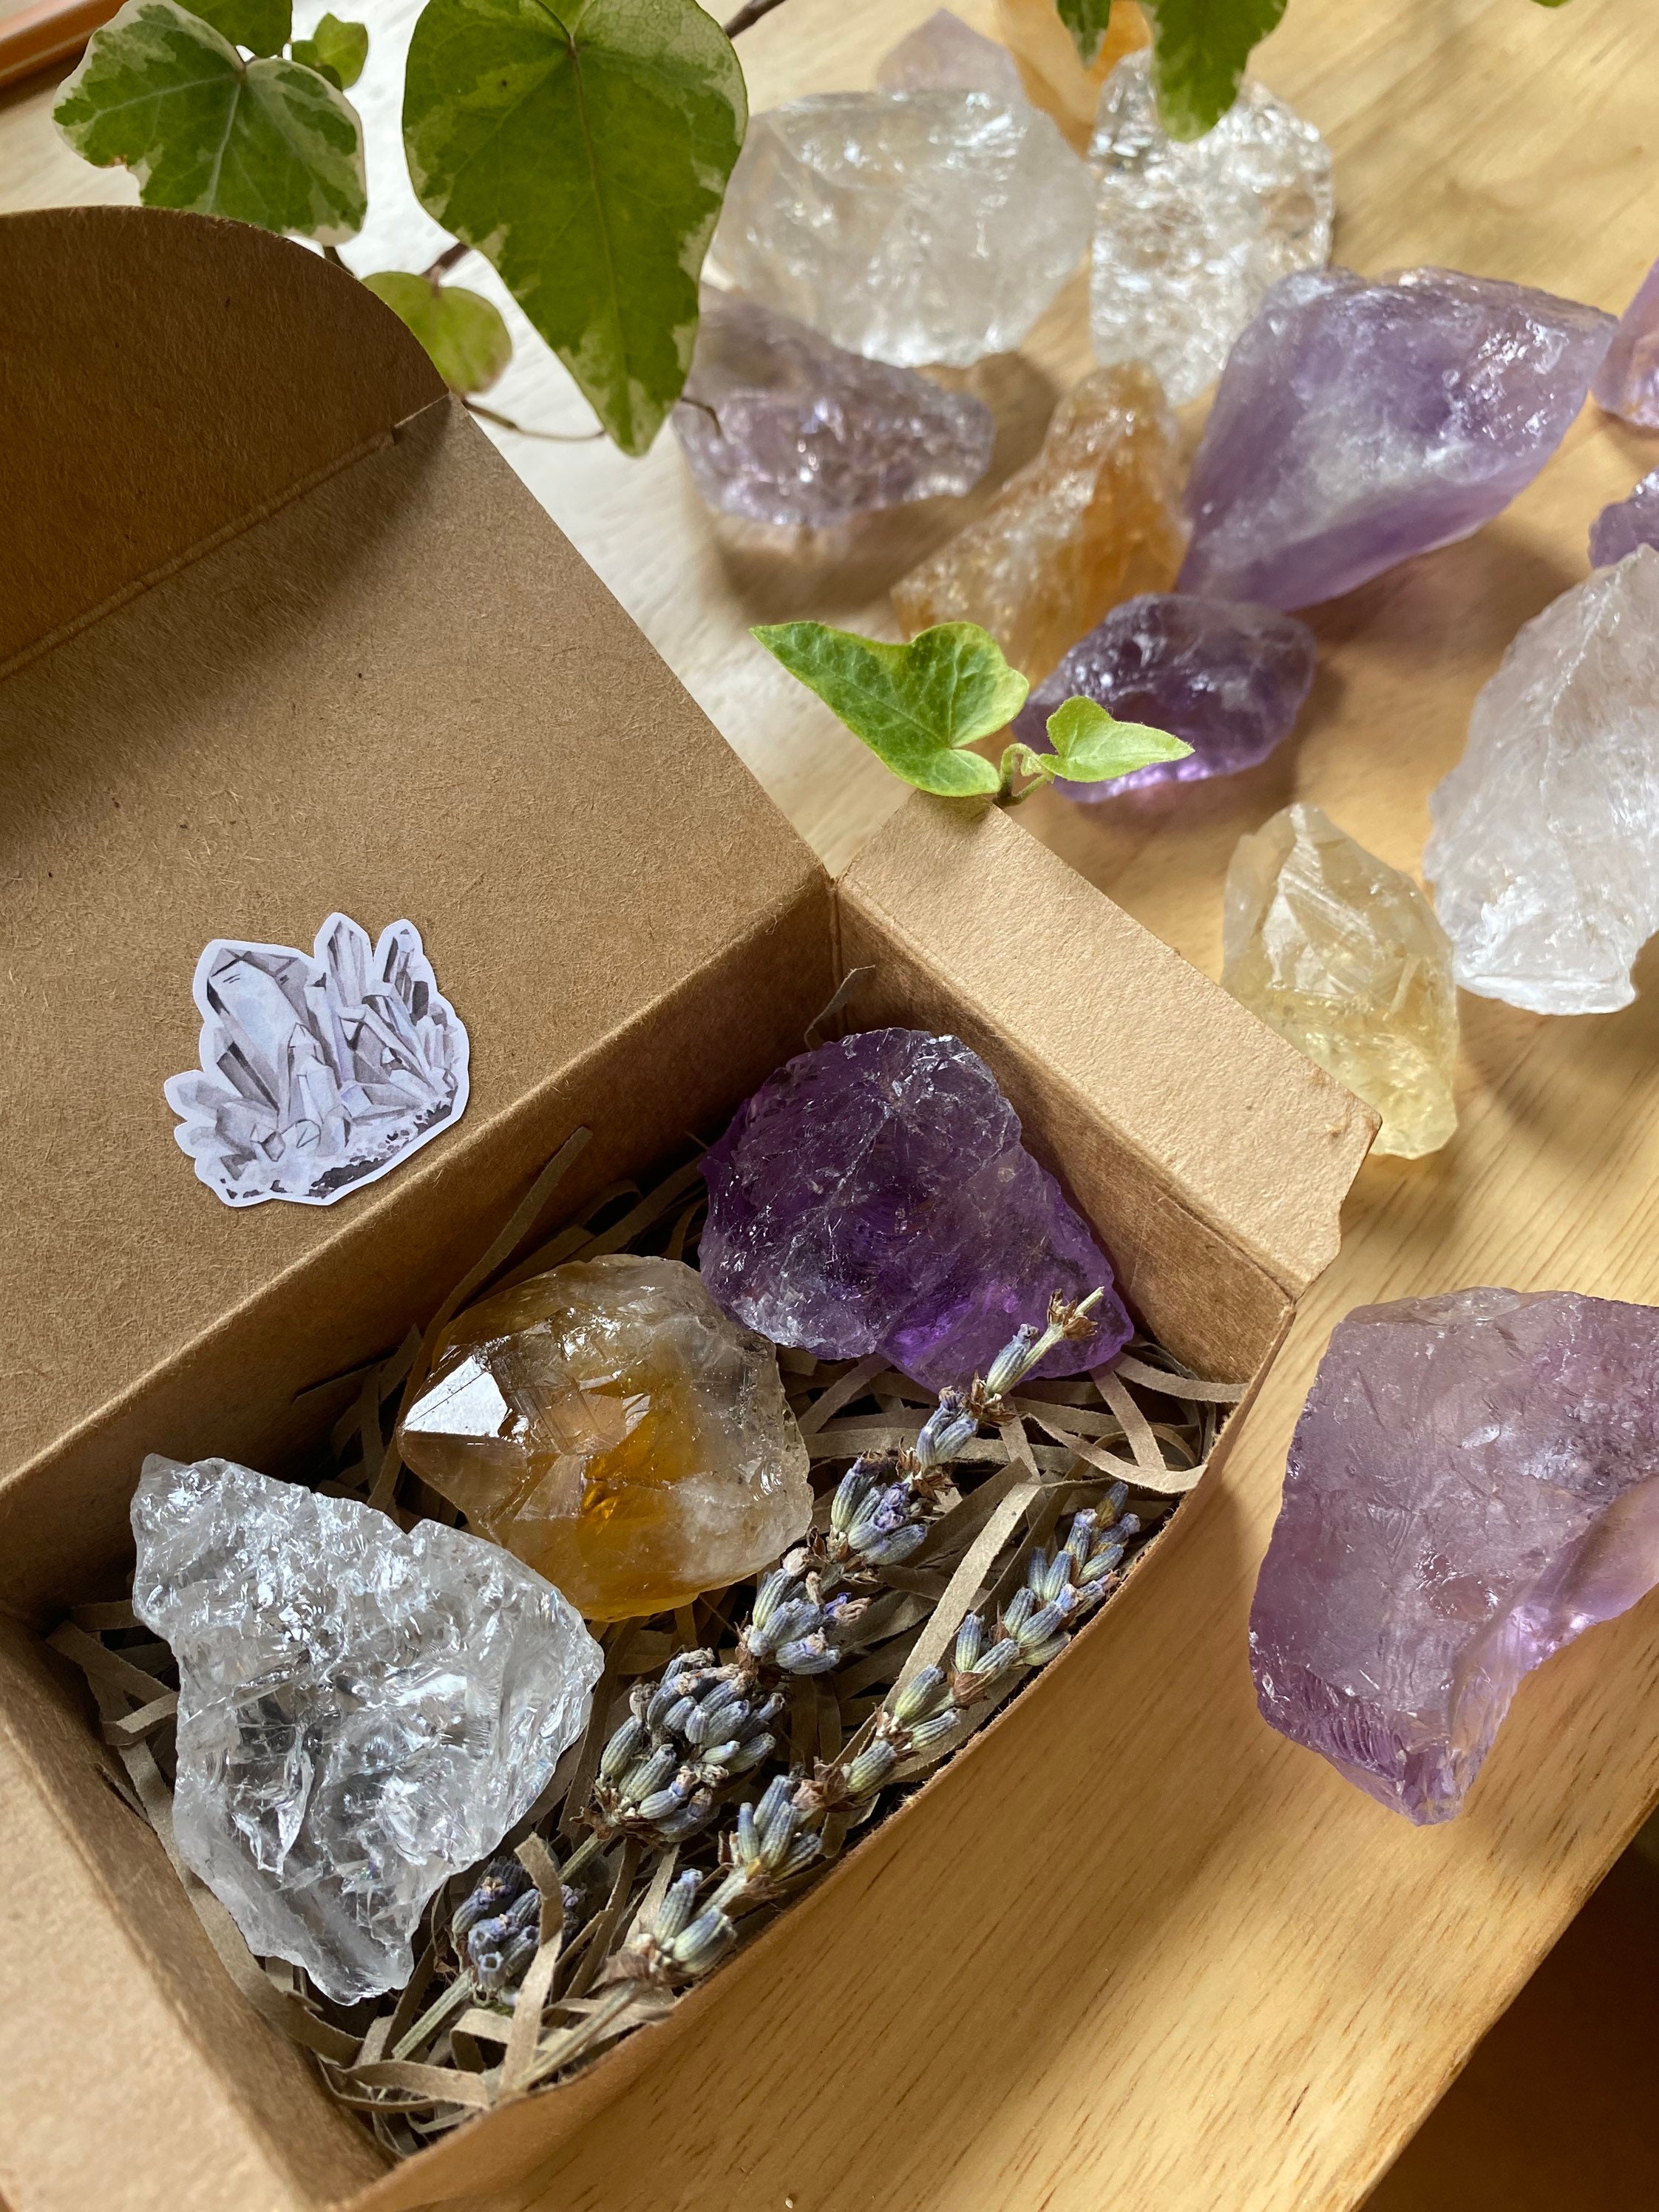  AtPerry's 16 Large Natural Healing Crystals Set in Wooden Box -  Tumbled, Rough & Raw Crystals, Including Selenite Tower, Black Tourmaline,  Amethyst, Rose Quartz, Lapiz Lazuli, Citrine & Tiger's Eye 